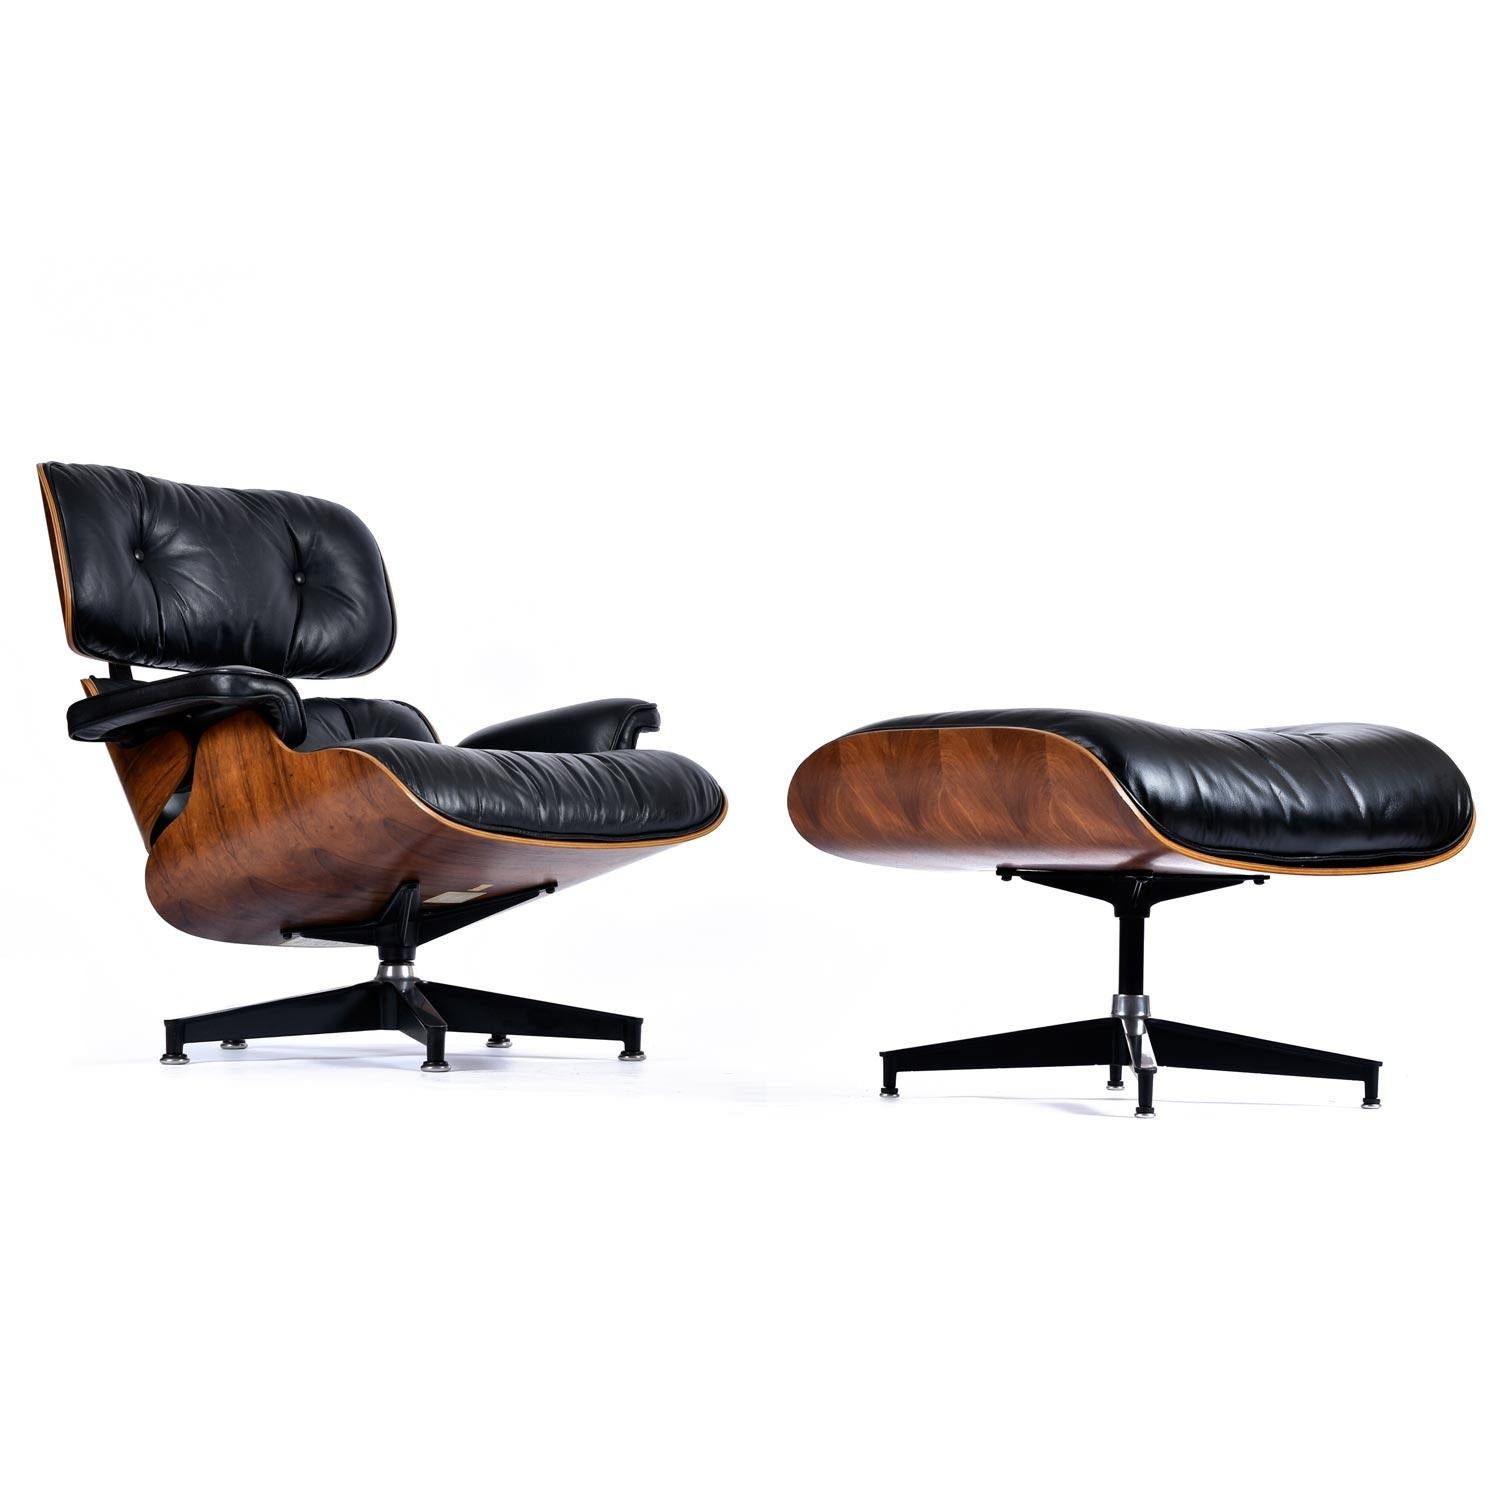 This stunning specimen of Mid-Century Modern history was procured by us from the daughter of the original owner. Both pieces are individually dated 1977. We're quite certain you won't find a more sublime vintage original manifestation of the Eames